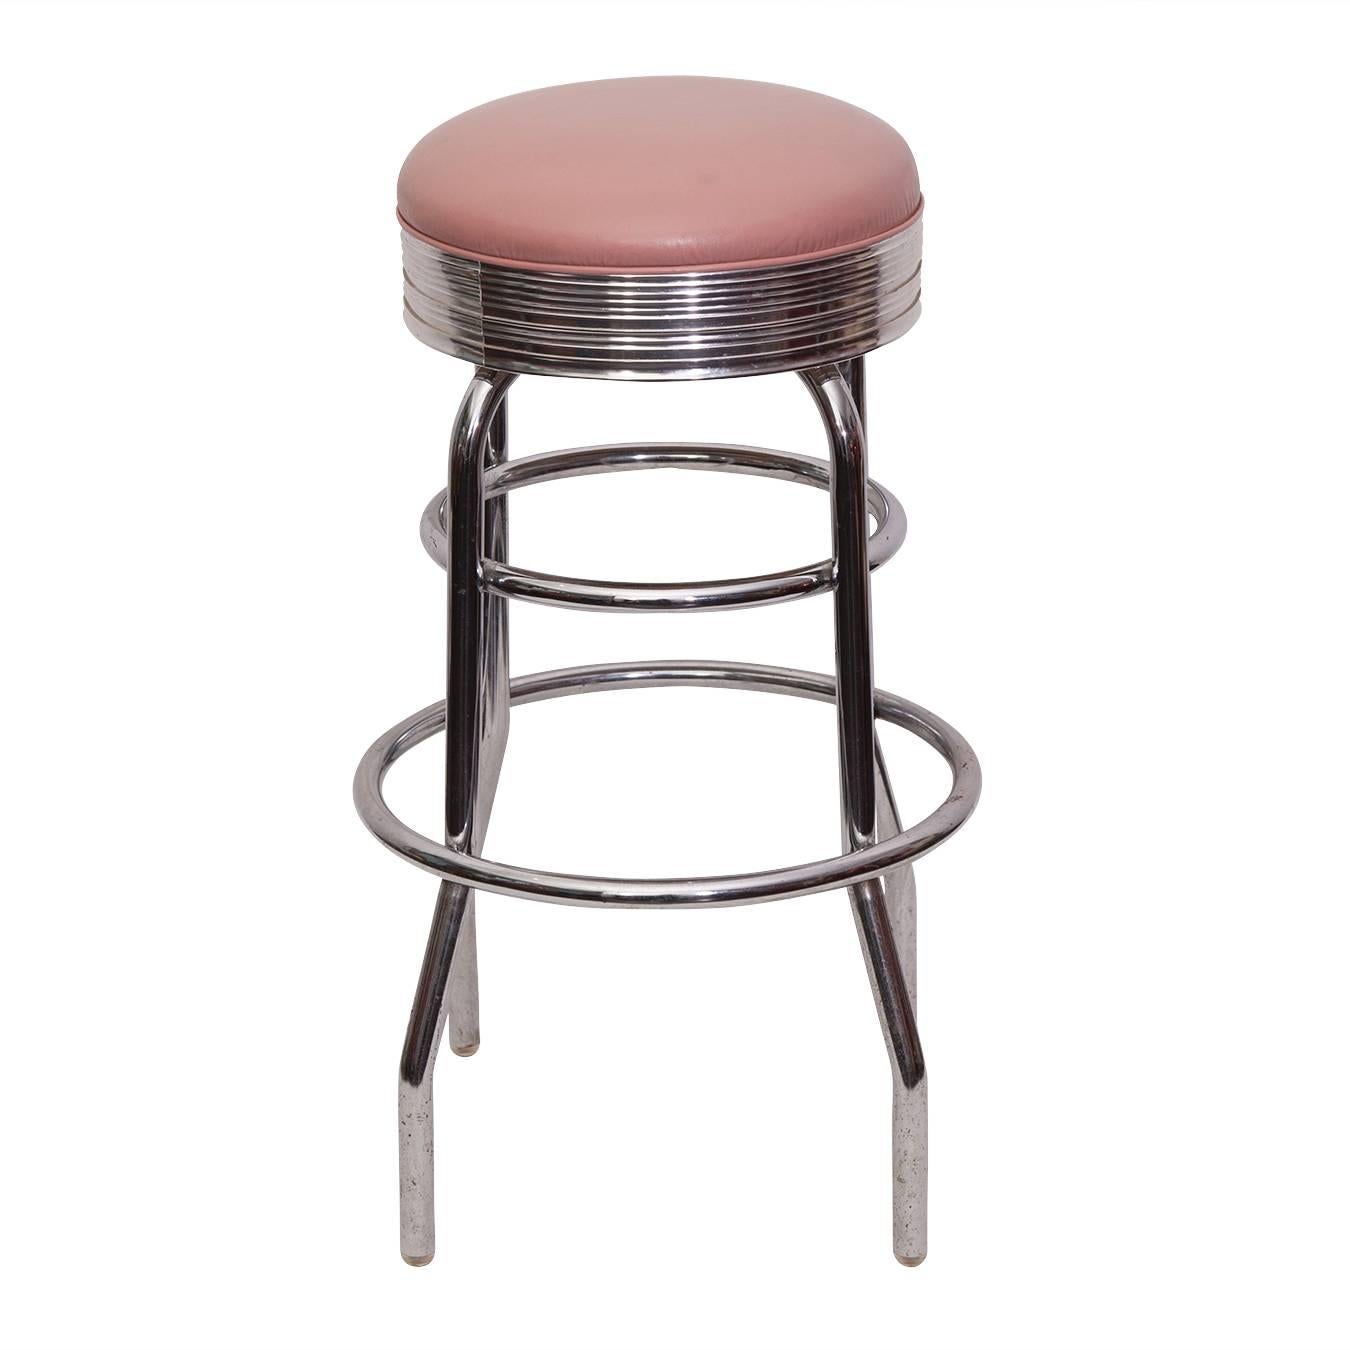 Retro 1960s chrome bar with pink leather stools.